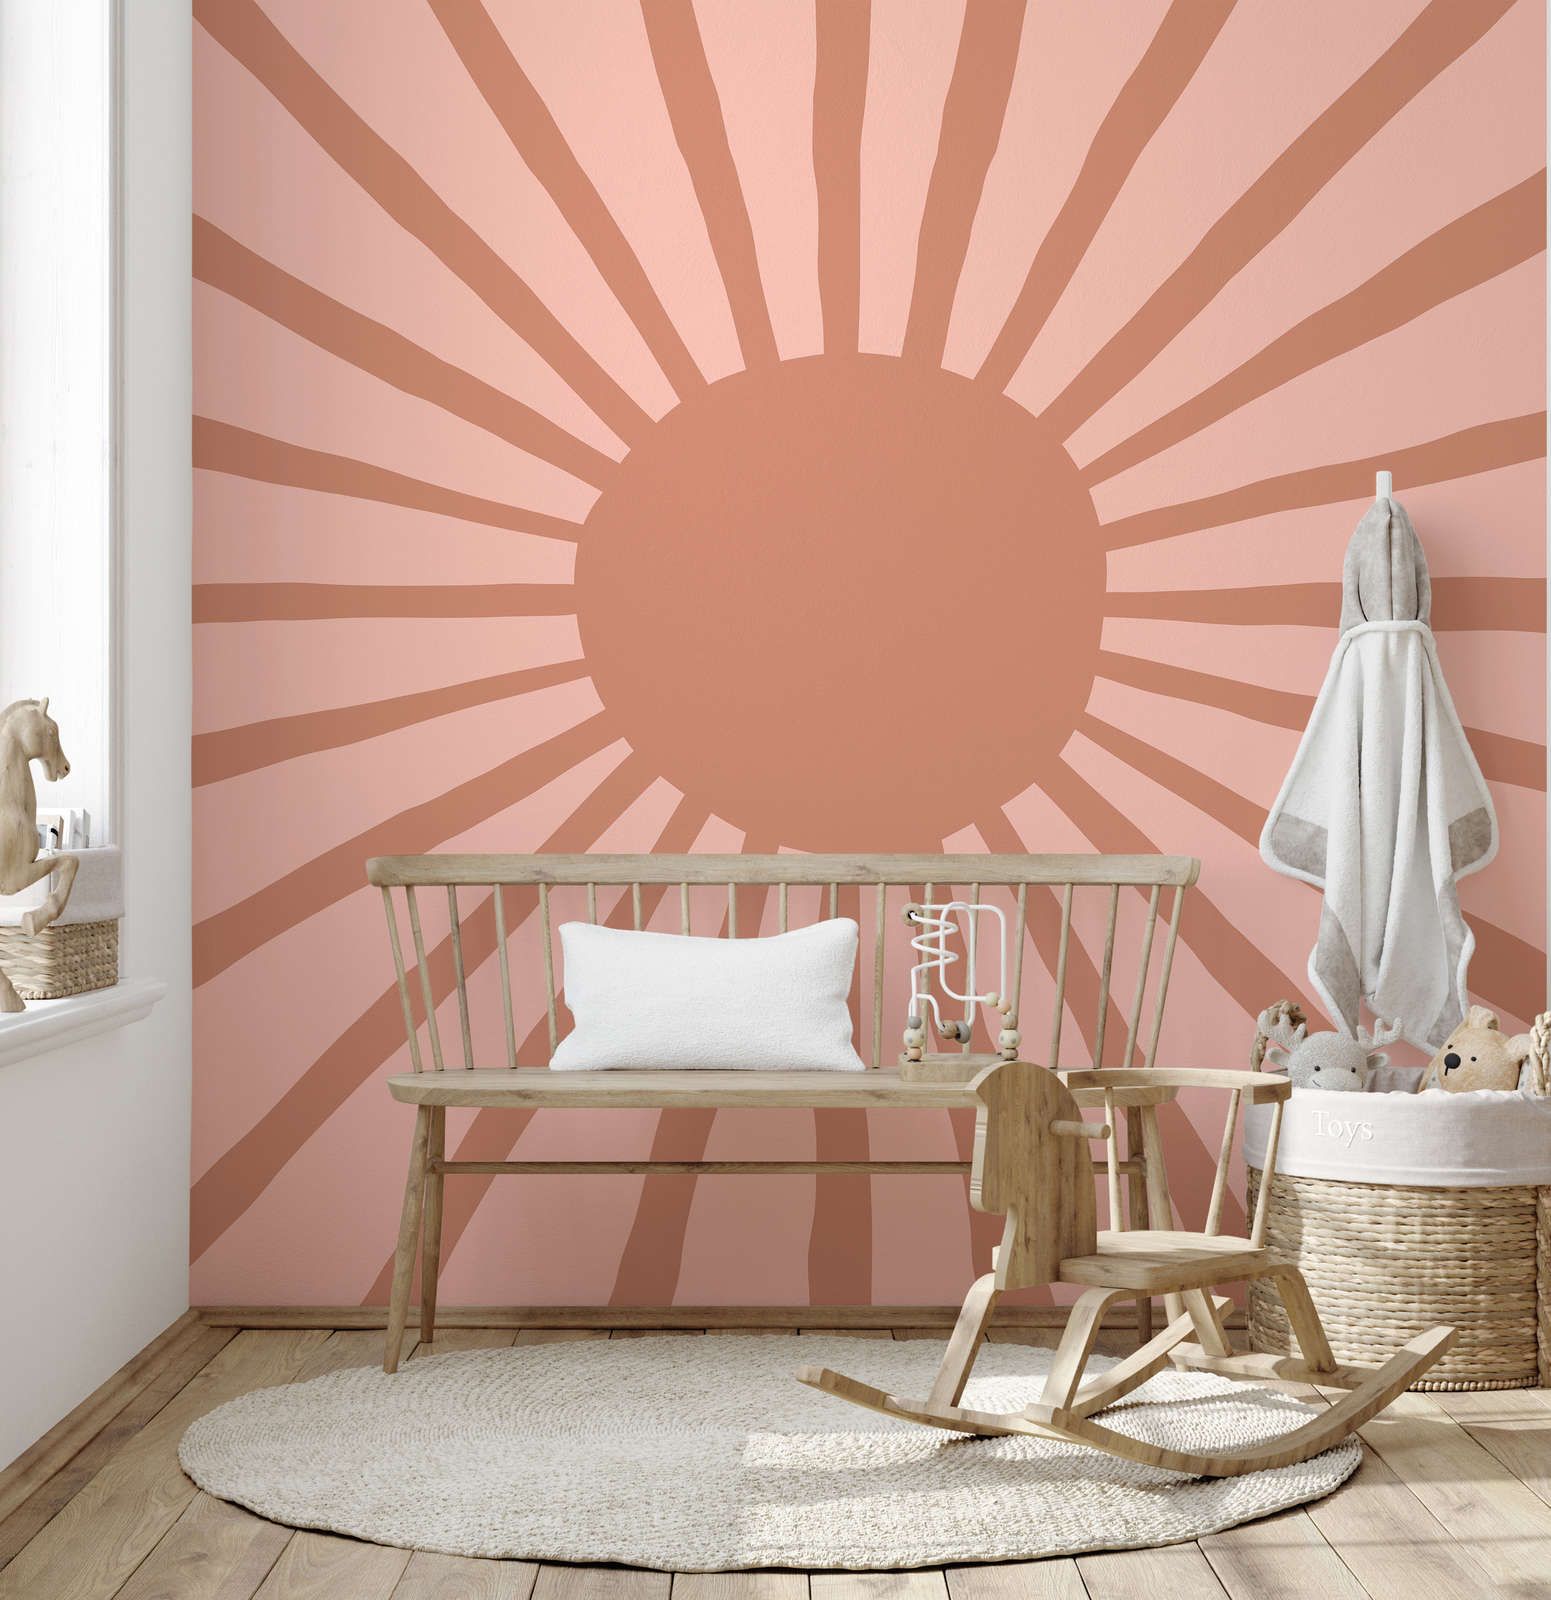             Painted Style Abstract Sun Wallpaper - Smooth & Matte Non-woven
        